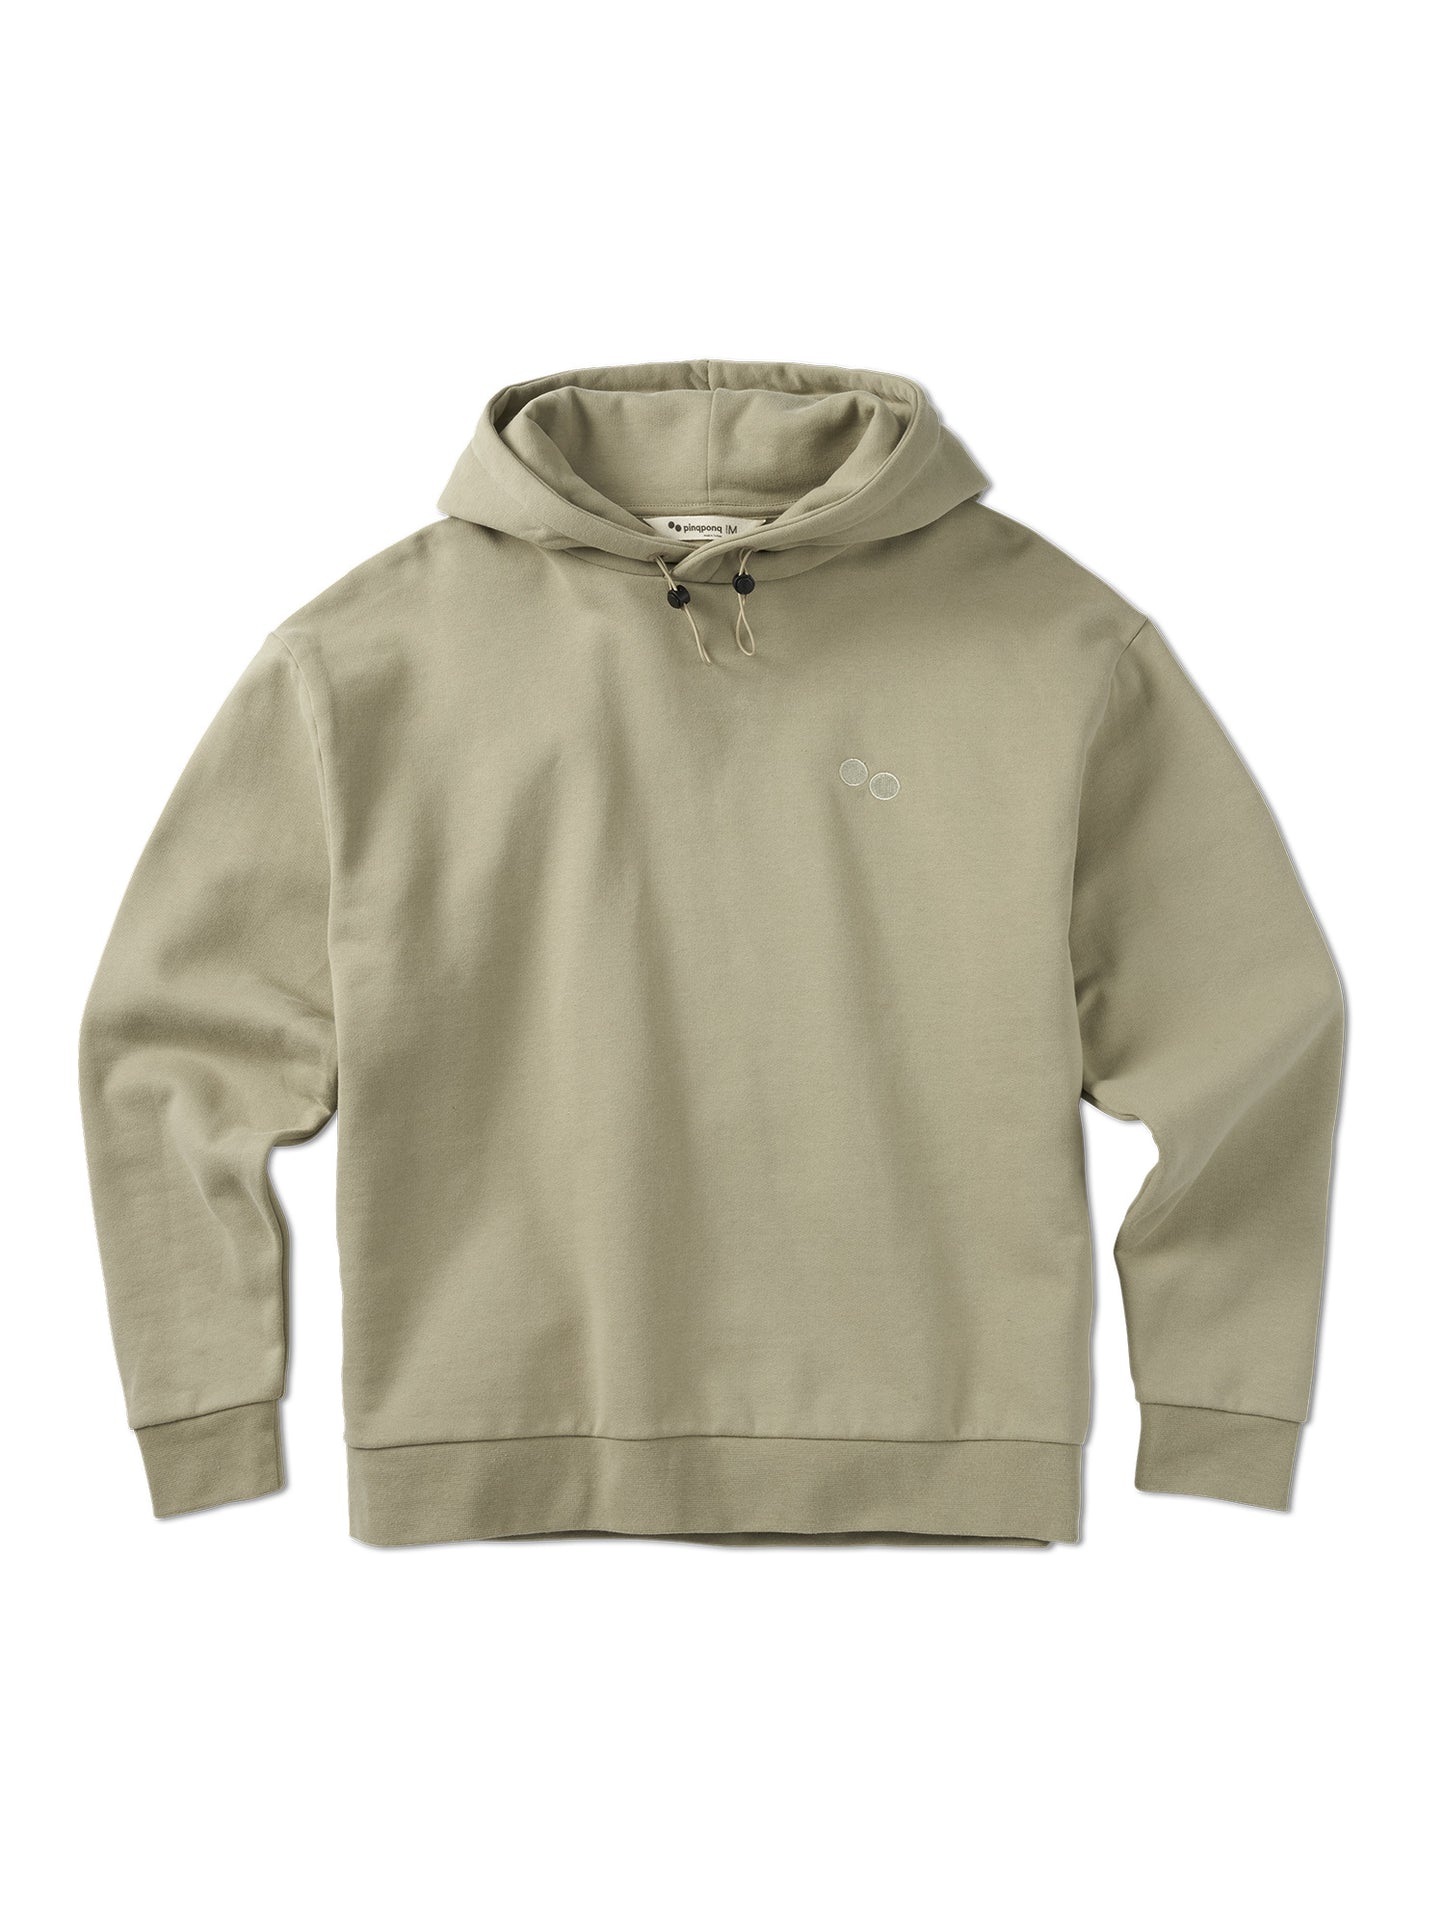 pinqponq-Hoodie-Unisex-Reed-Olive-front